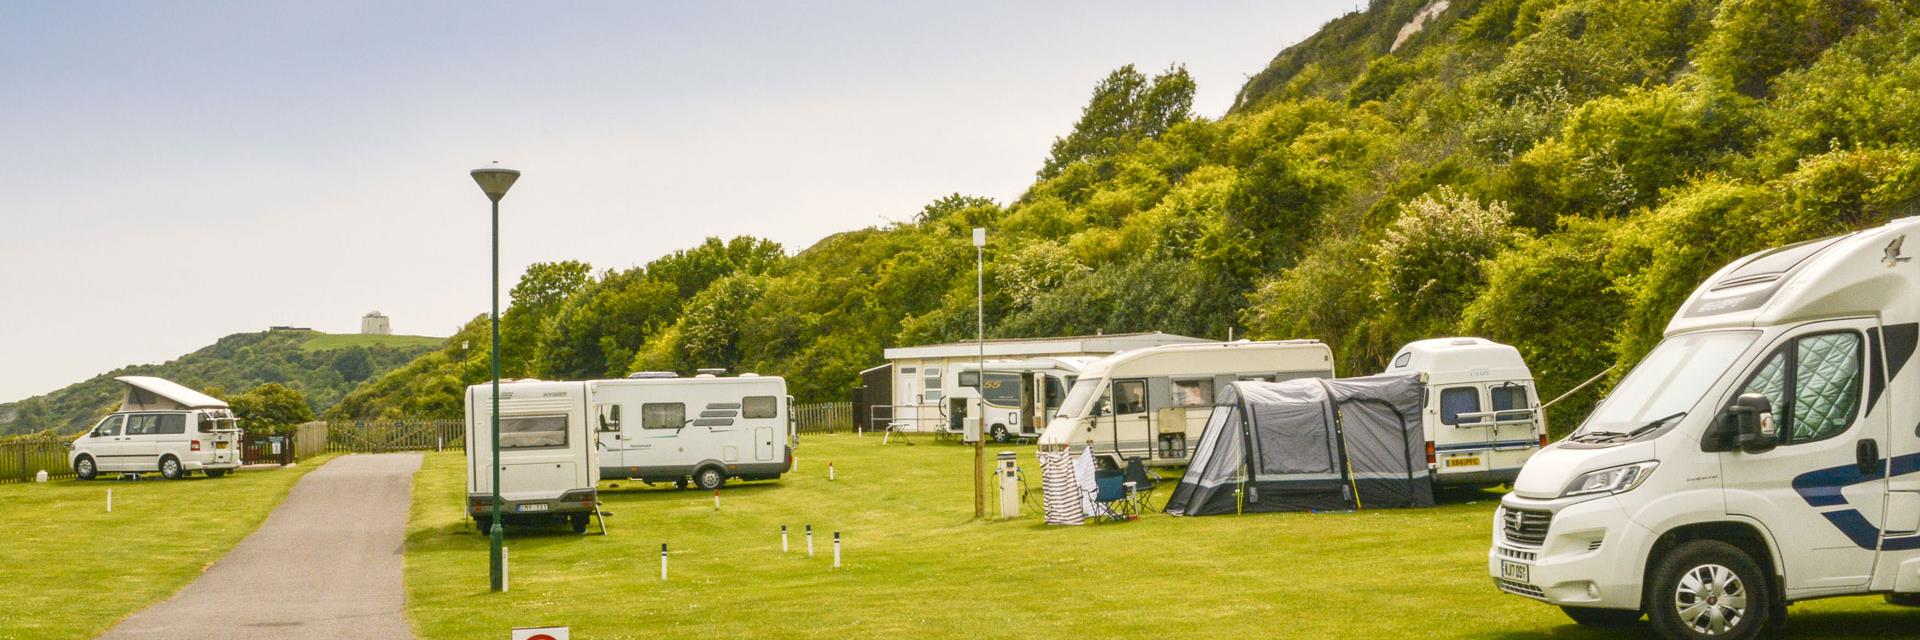 Slaapkamer opmerking straf Find Campsites in the UK & Europe - The Camping and Caravanning Club